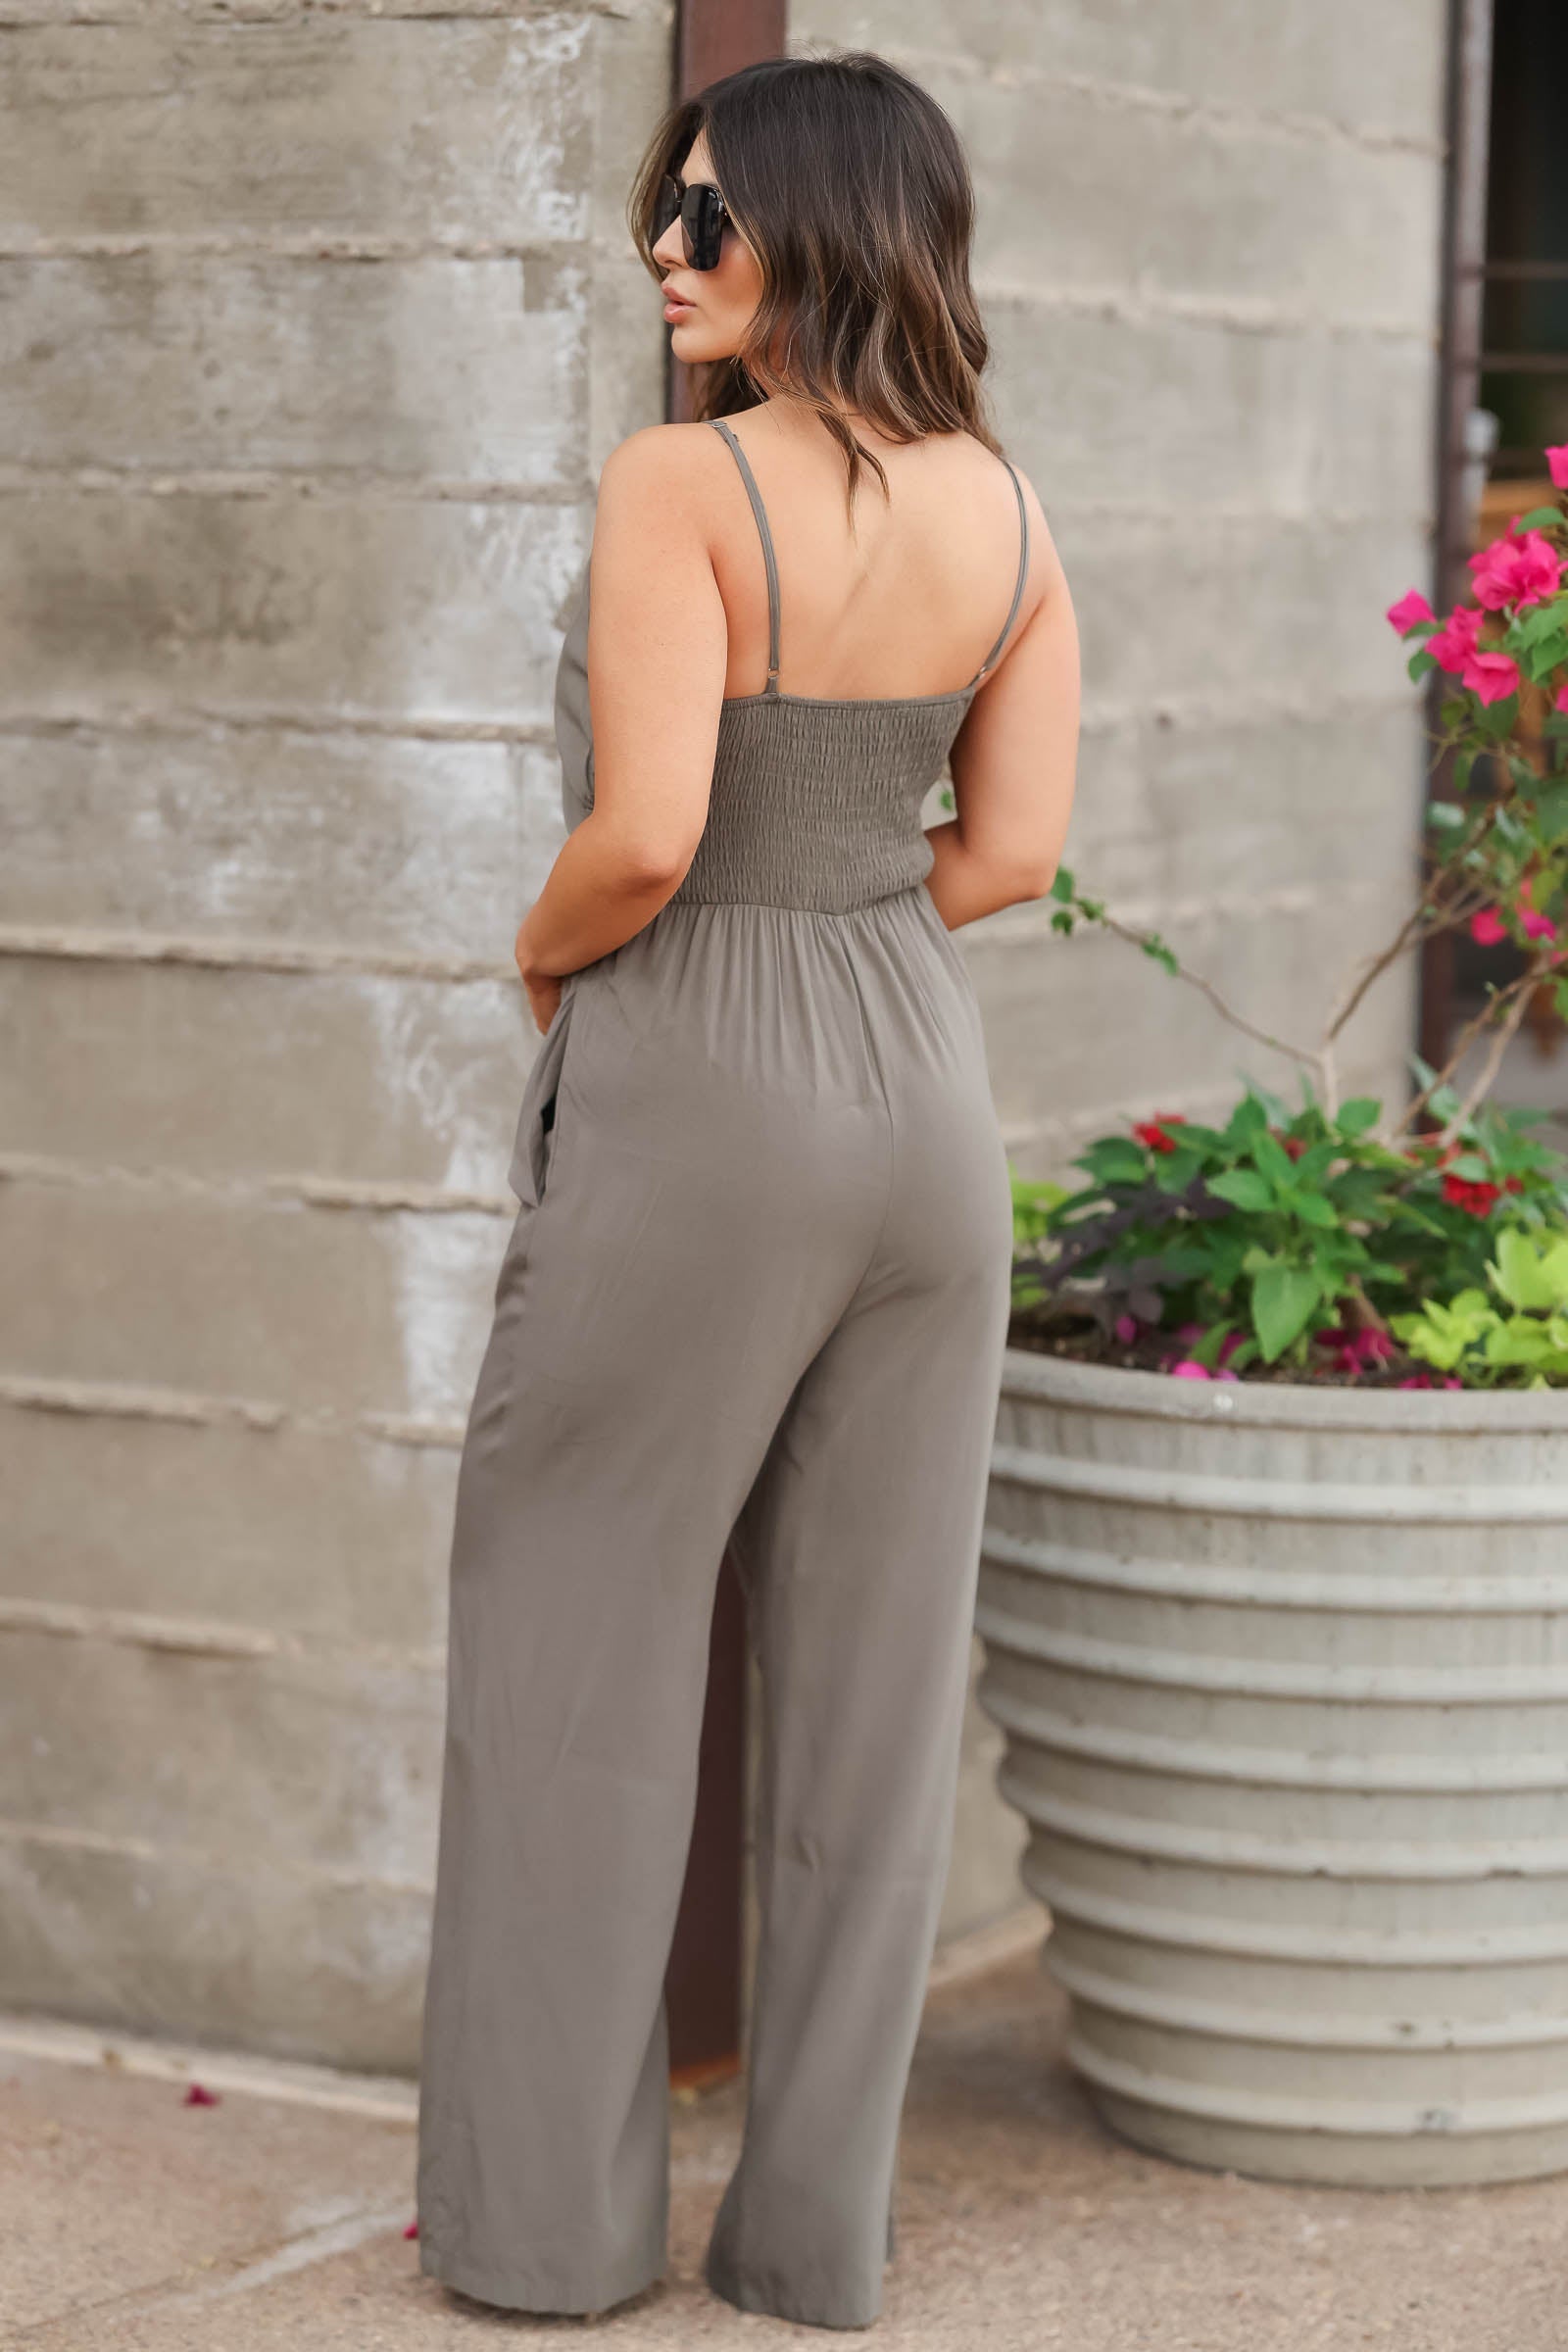 Taking It Home Jumpsuit - Olive, Closet Candy, 1